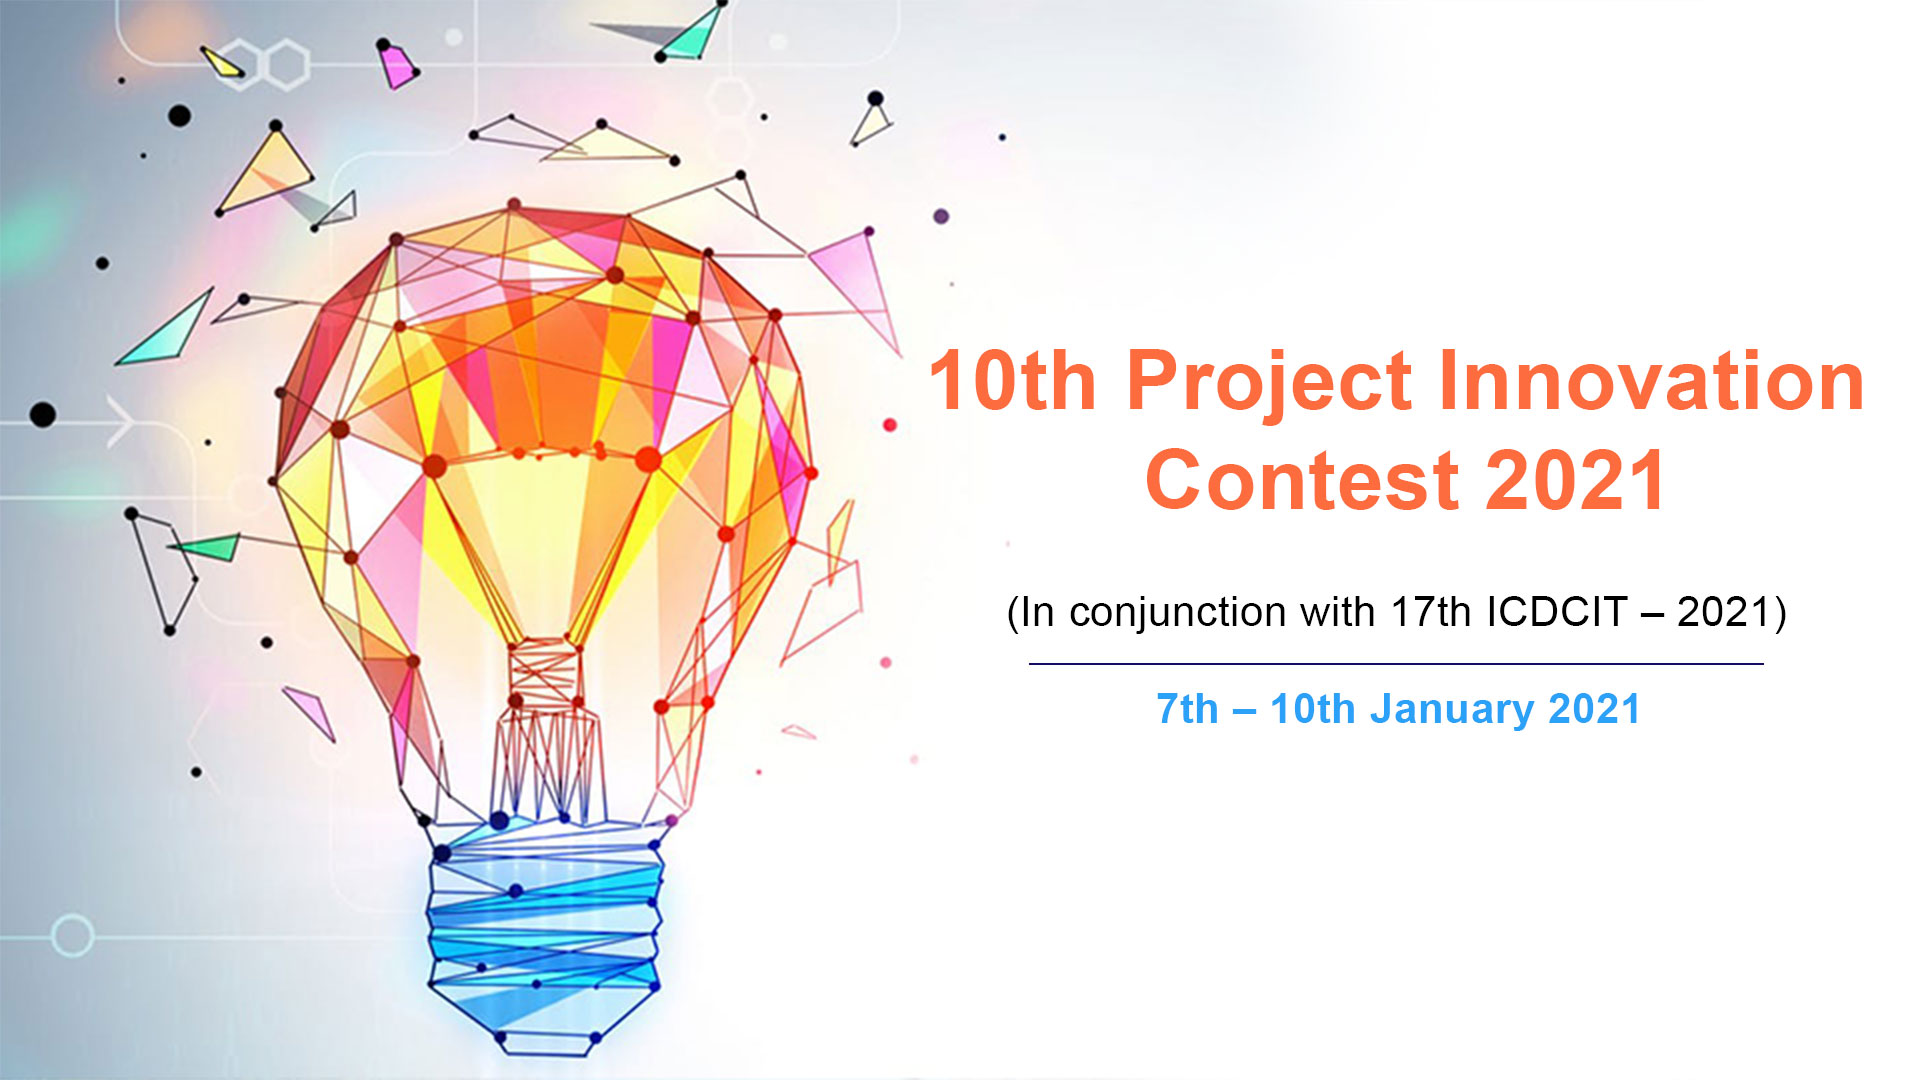 10th Project Innovation Contest 2021 KIIT Deemed to be University